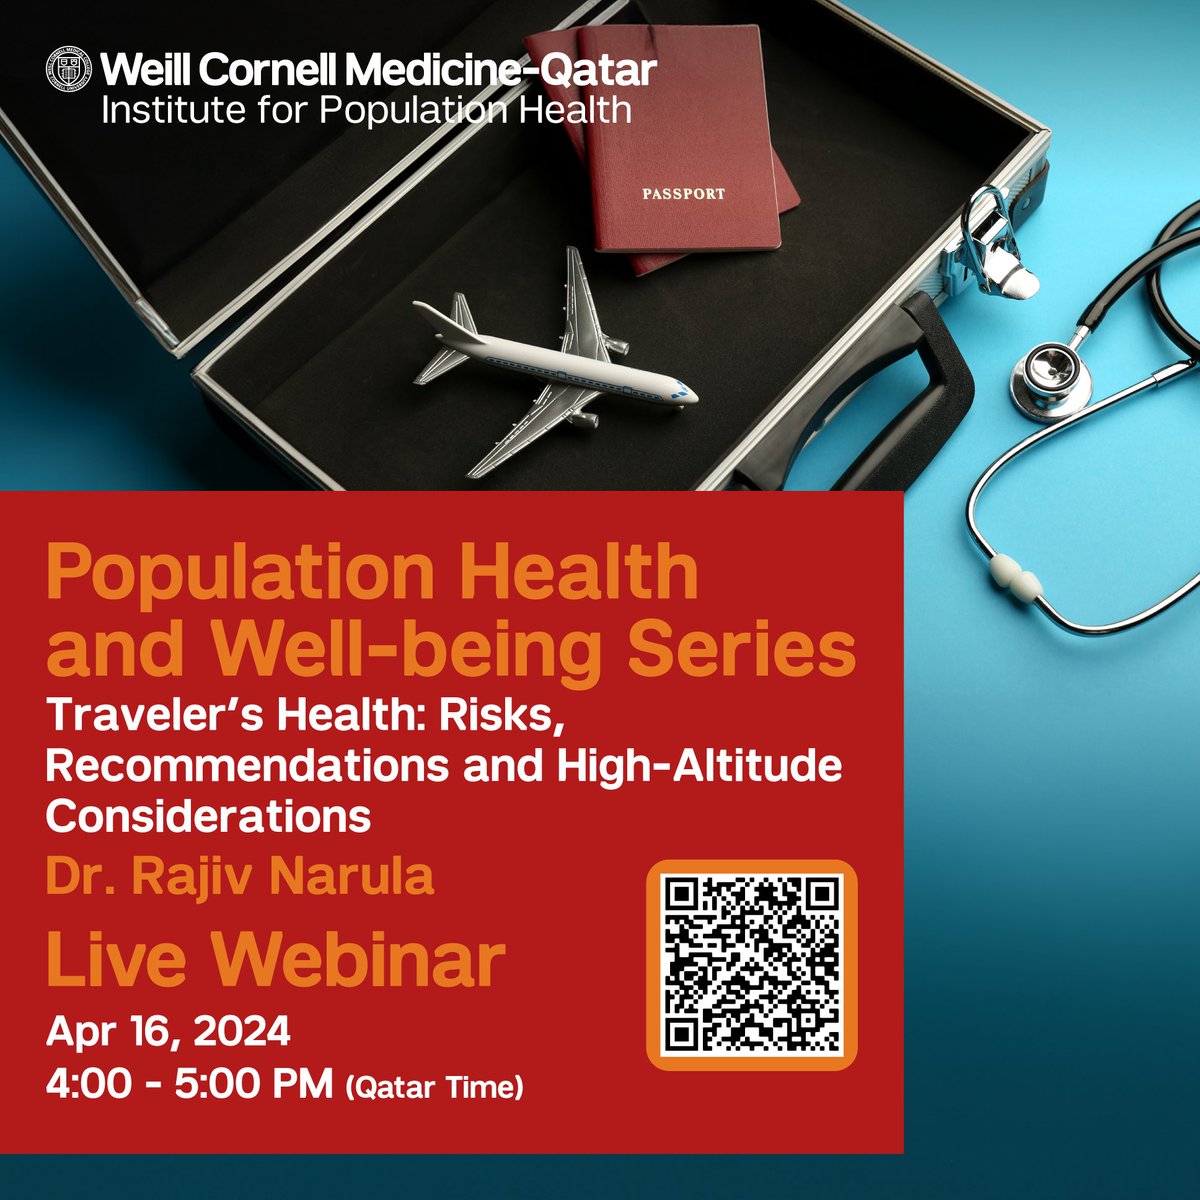 Join our webinar on Travelers' #Health: Recommendations & High-Altitude Considerations
April 16 | 4 PM Qatar time with our expert speaker Dr. Rajiv Narula.
Register now: ow.ly/c3HQ50R6gAk

@WCMQatar @LifeMedGlobal @ISLifeMedicine @ACLifeMed